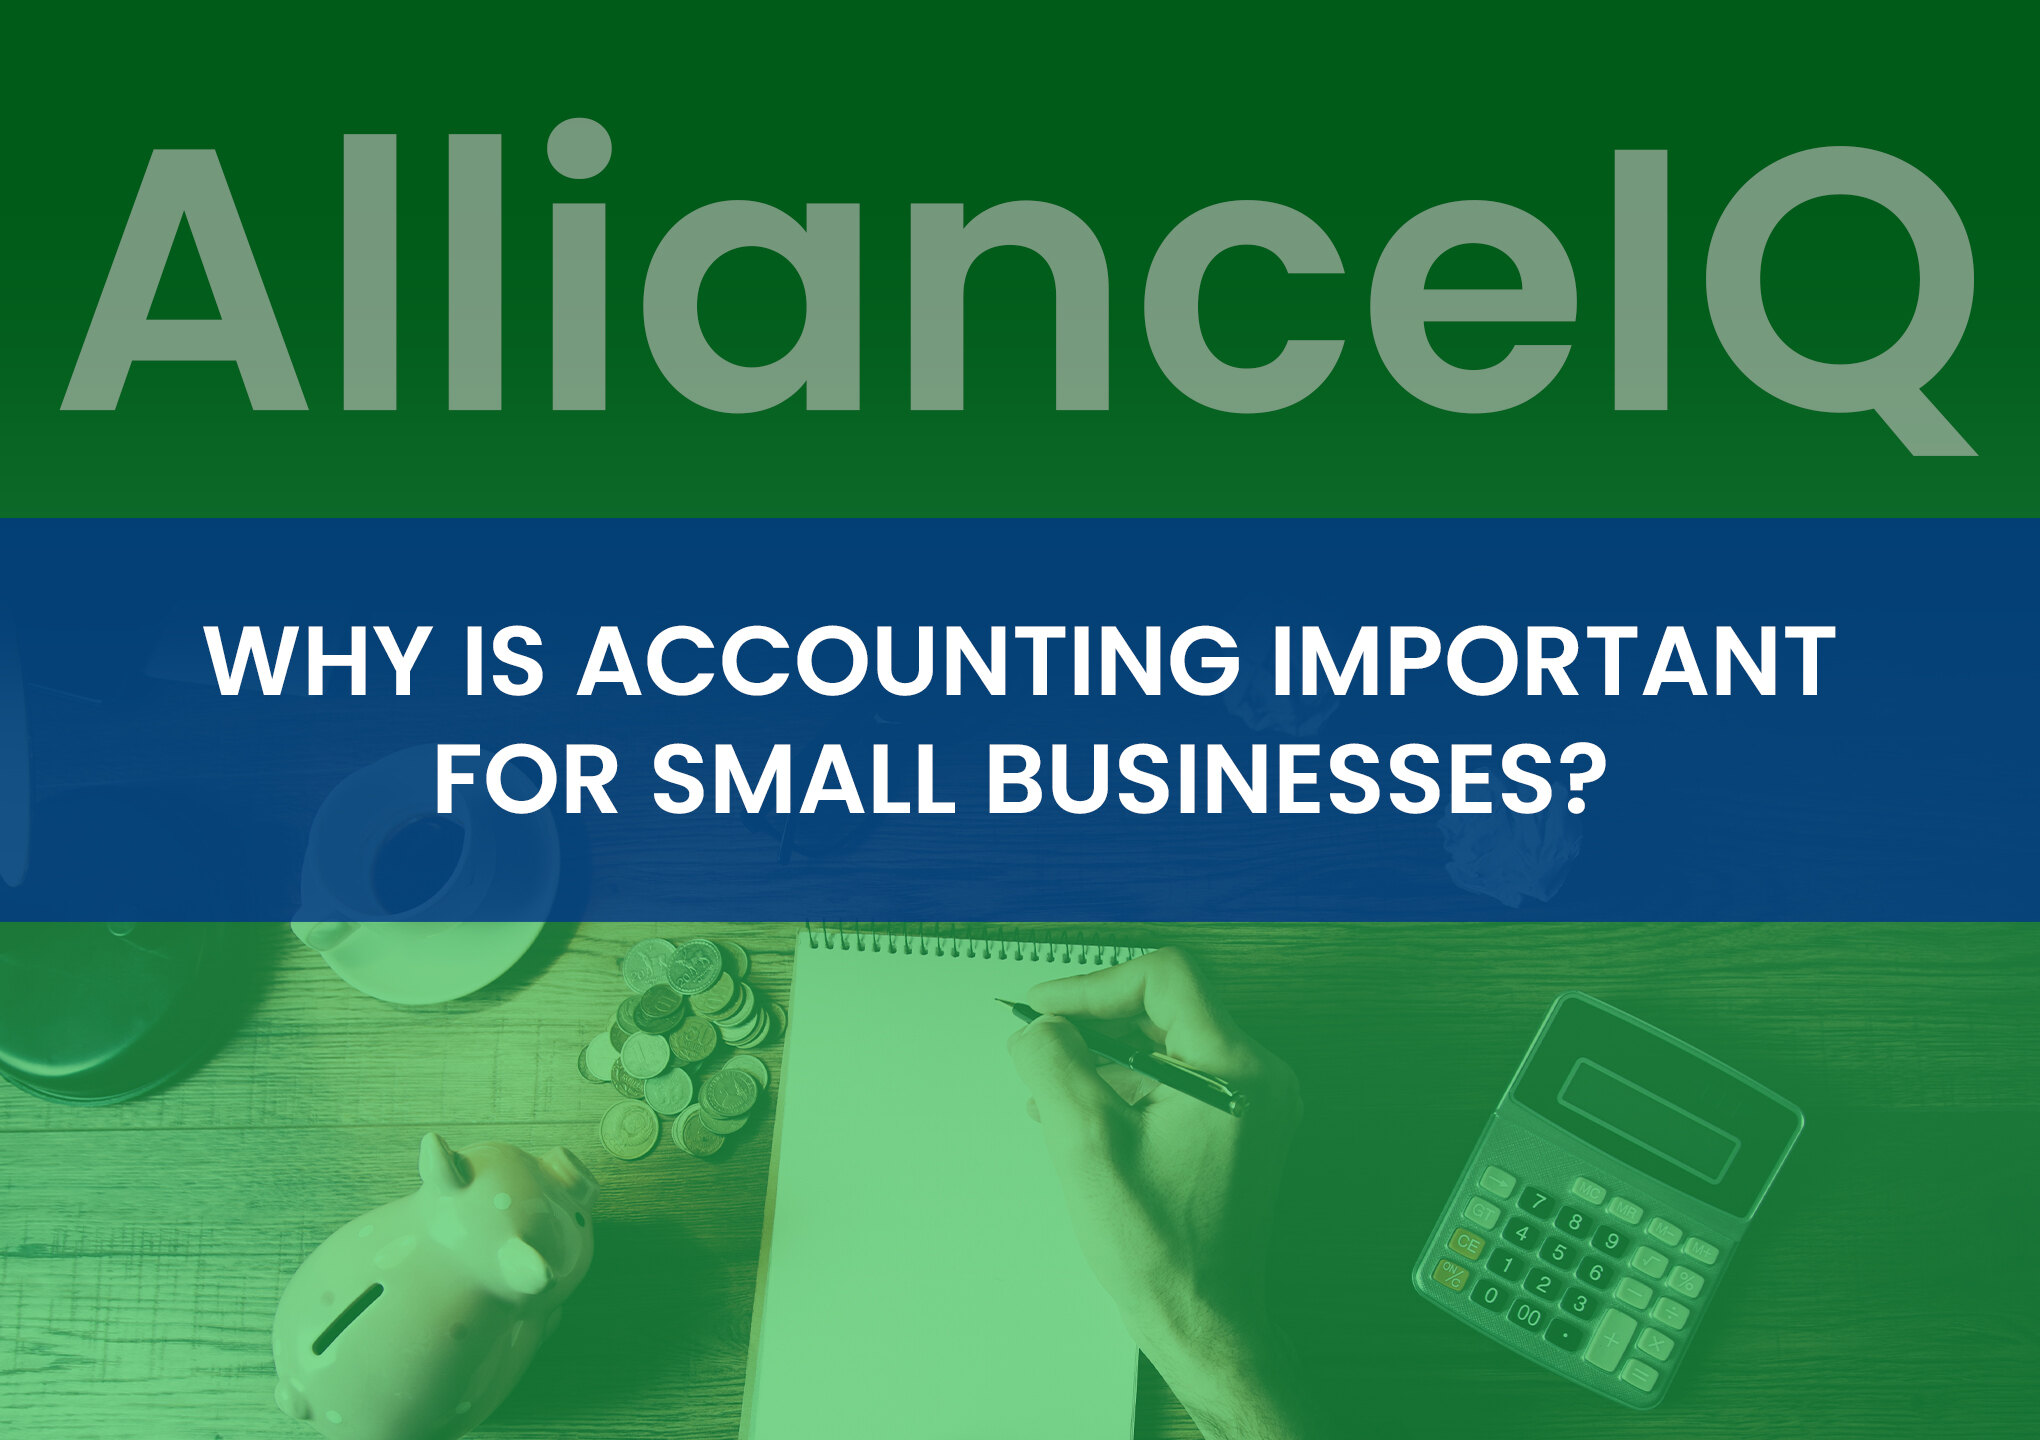 Why Is Accounting Important for Small Businesses